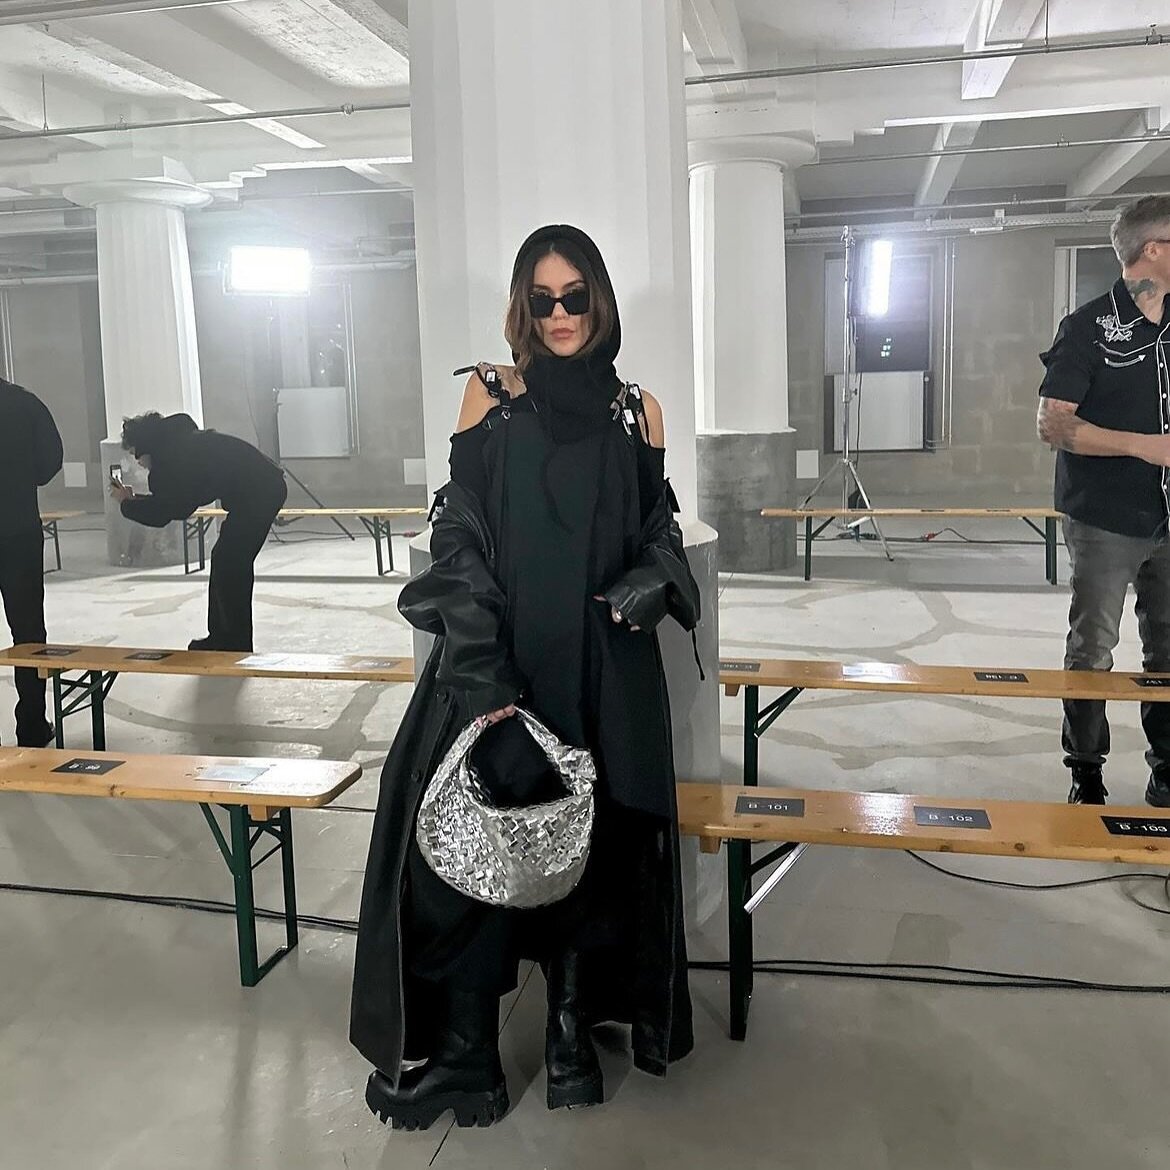 arv&reg; - @nadiaidder rockin&rsquo; our one-of-a-kind black poplin dress with chain straps embellished with numerous key hang tags during cphfw⛓️🖤

#arv #arvcopenhagen #sustainablefashion